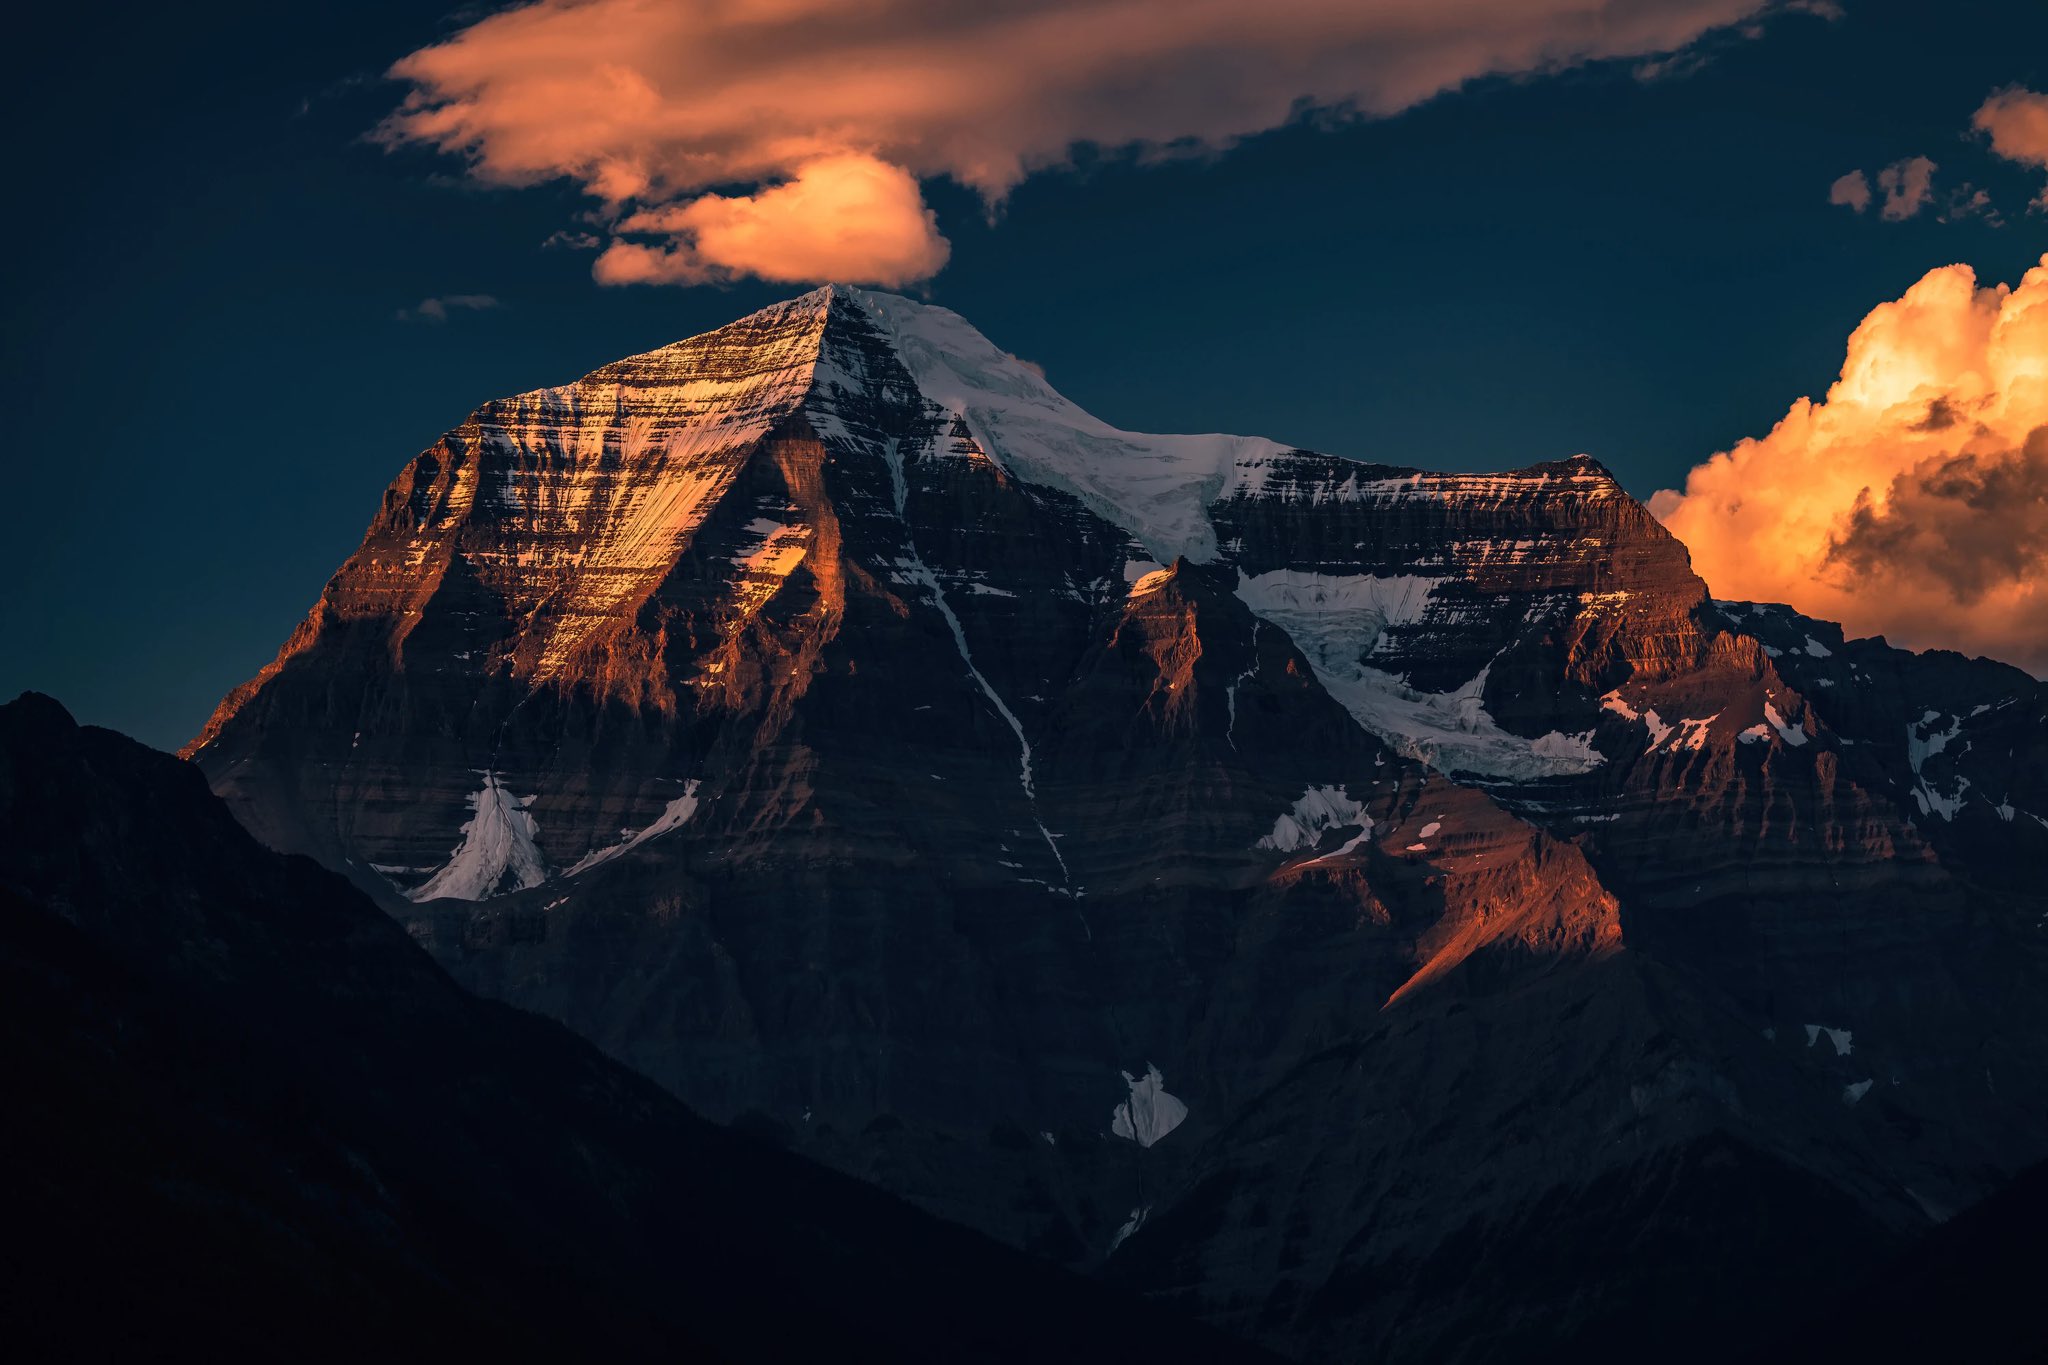 Nature Clouds Sky Landscape Mountains Snowy Mountain Sunlight Sunset Glow Snow Mount Robson 2048x1365